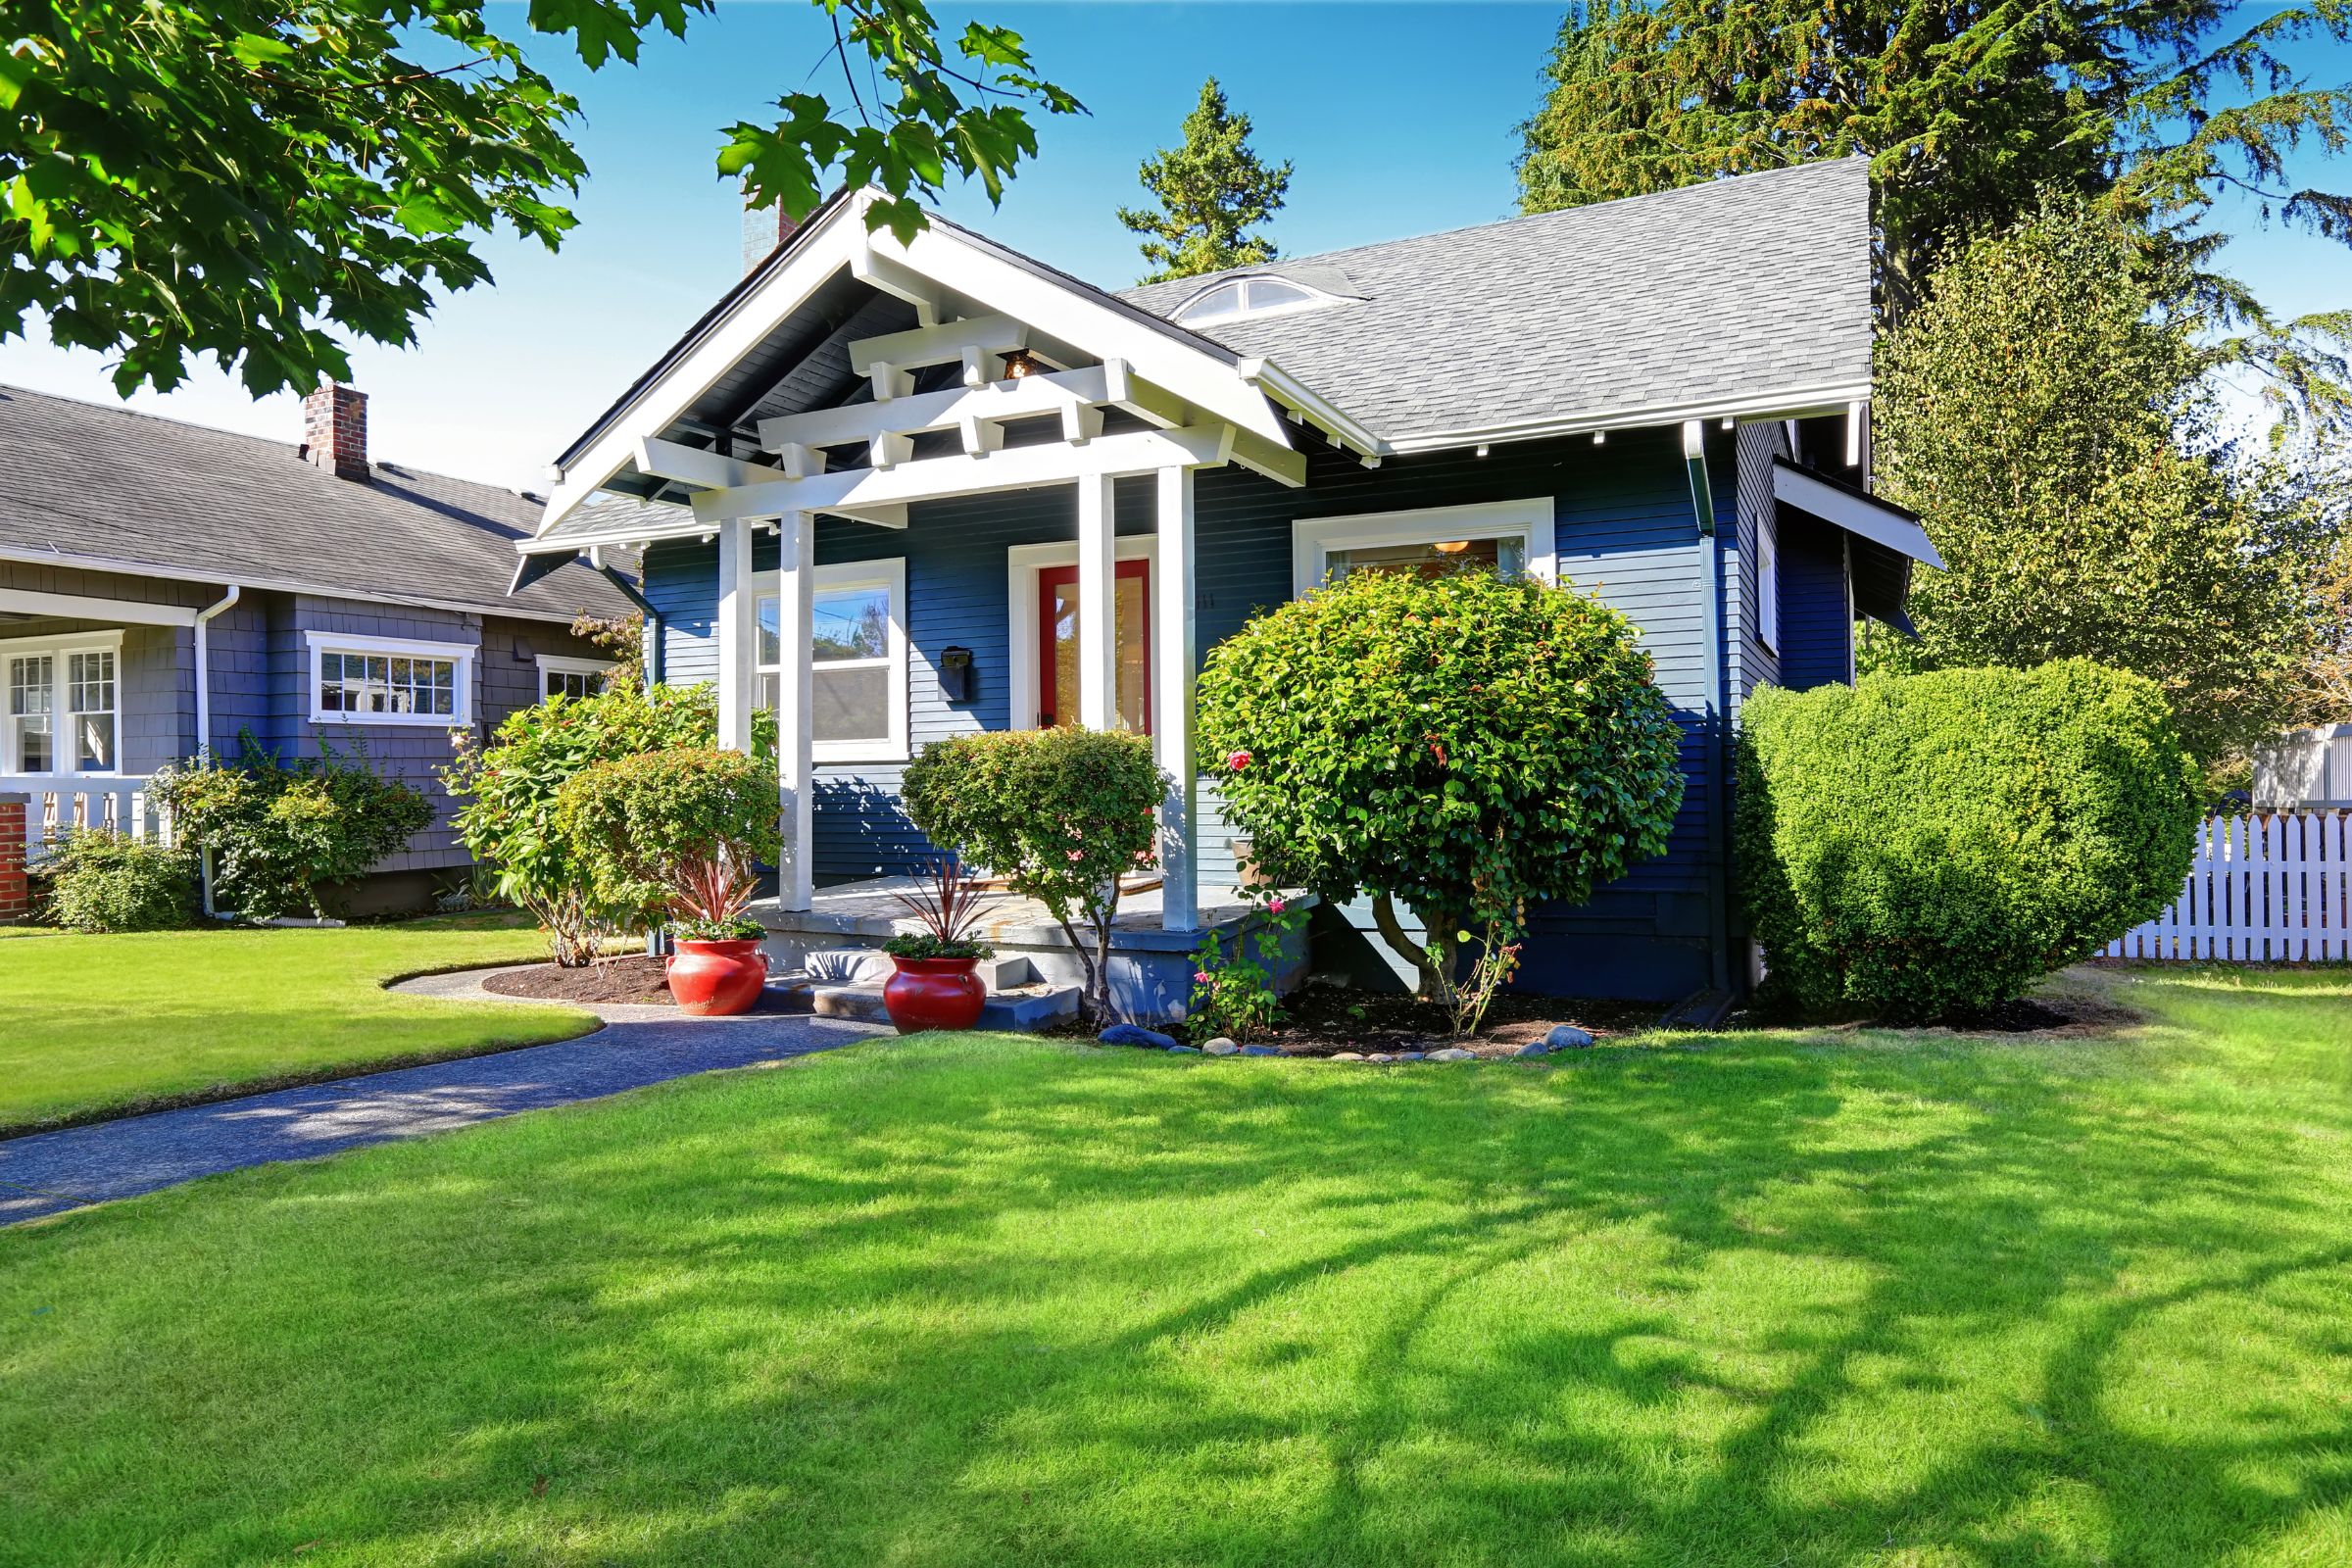 Curb Appeal Secrets for a Beautiful Home Exterior